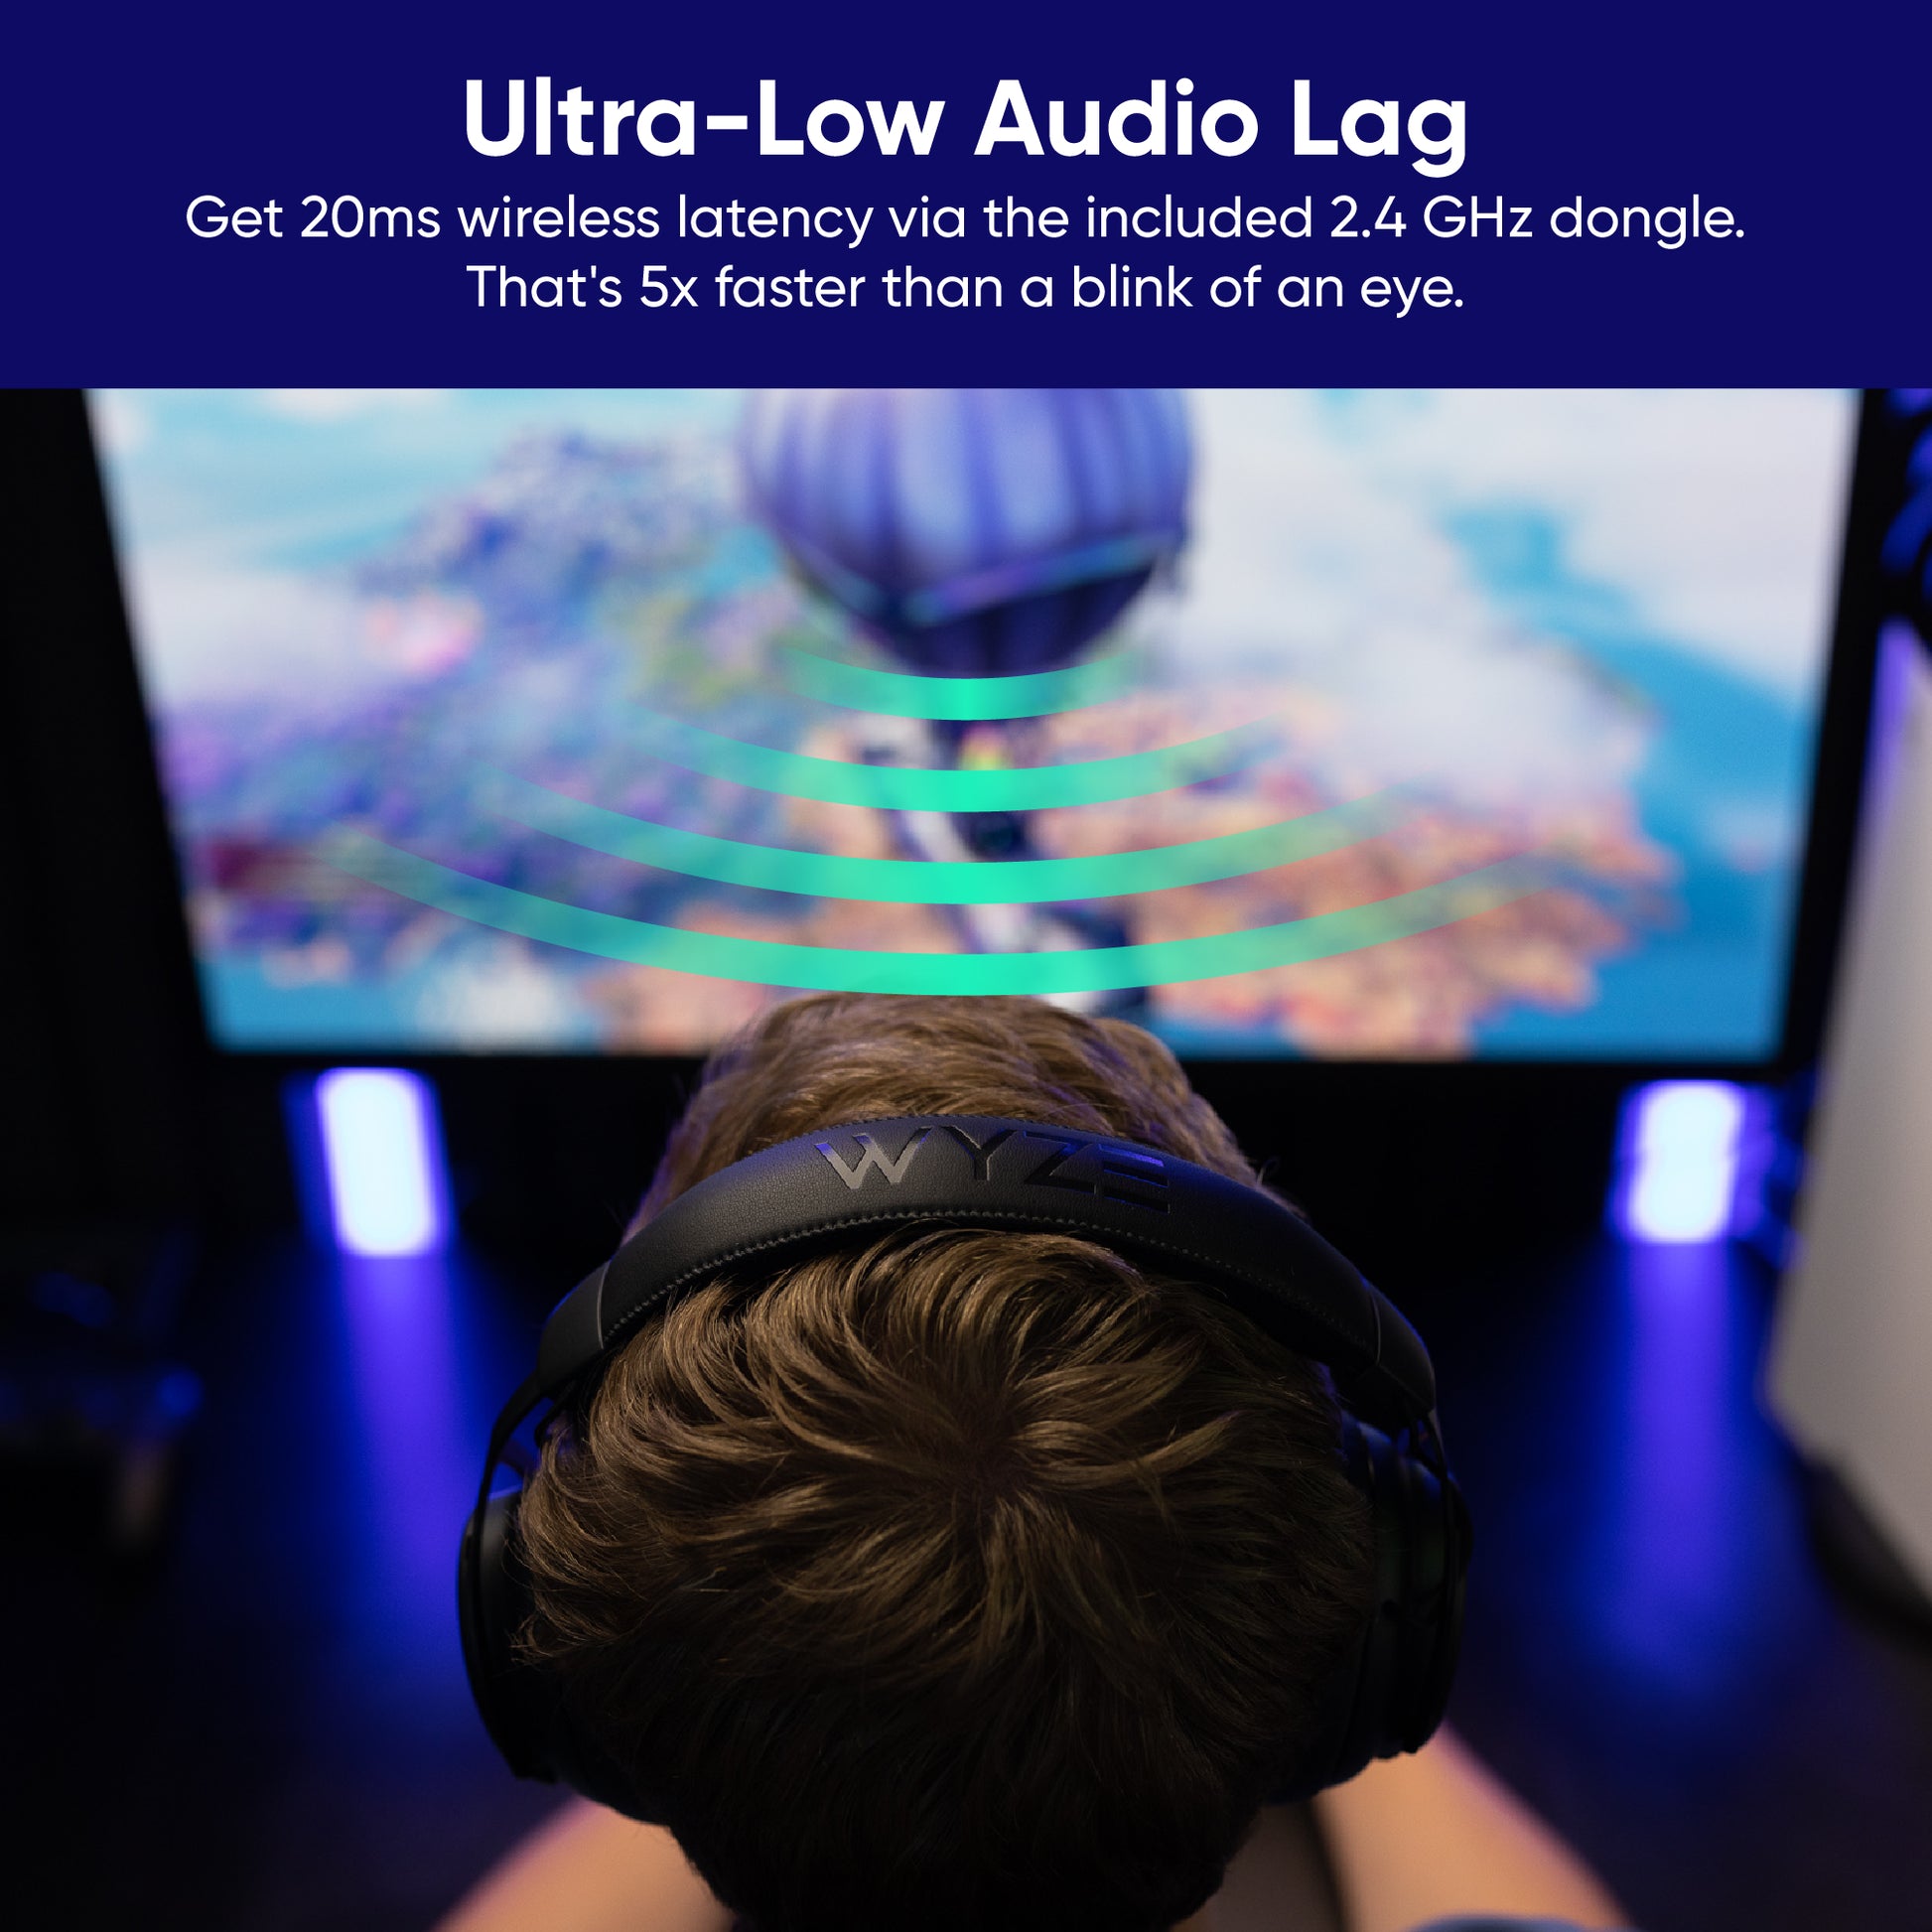 Person wearing gaming headset playing video games. Text overlay says, "Ultra low audio lag, get 20ms wireless latency via the included 2.4 GHz dongle."